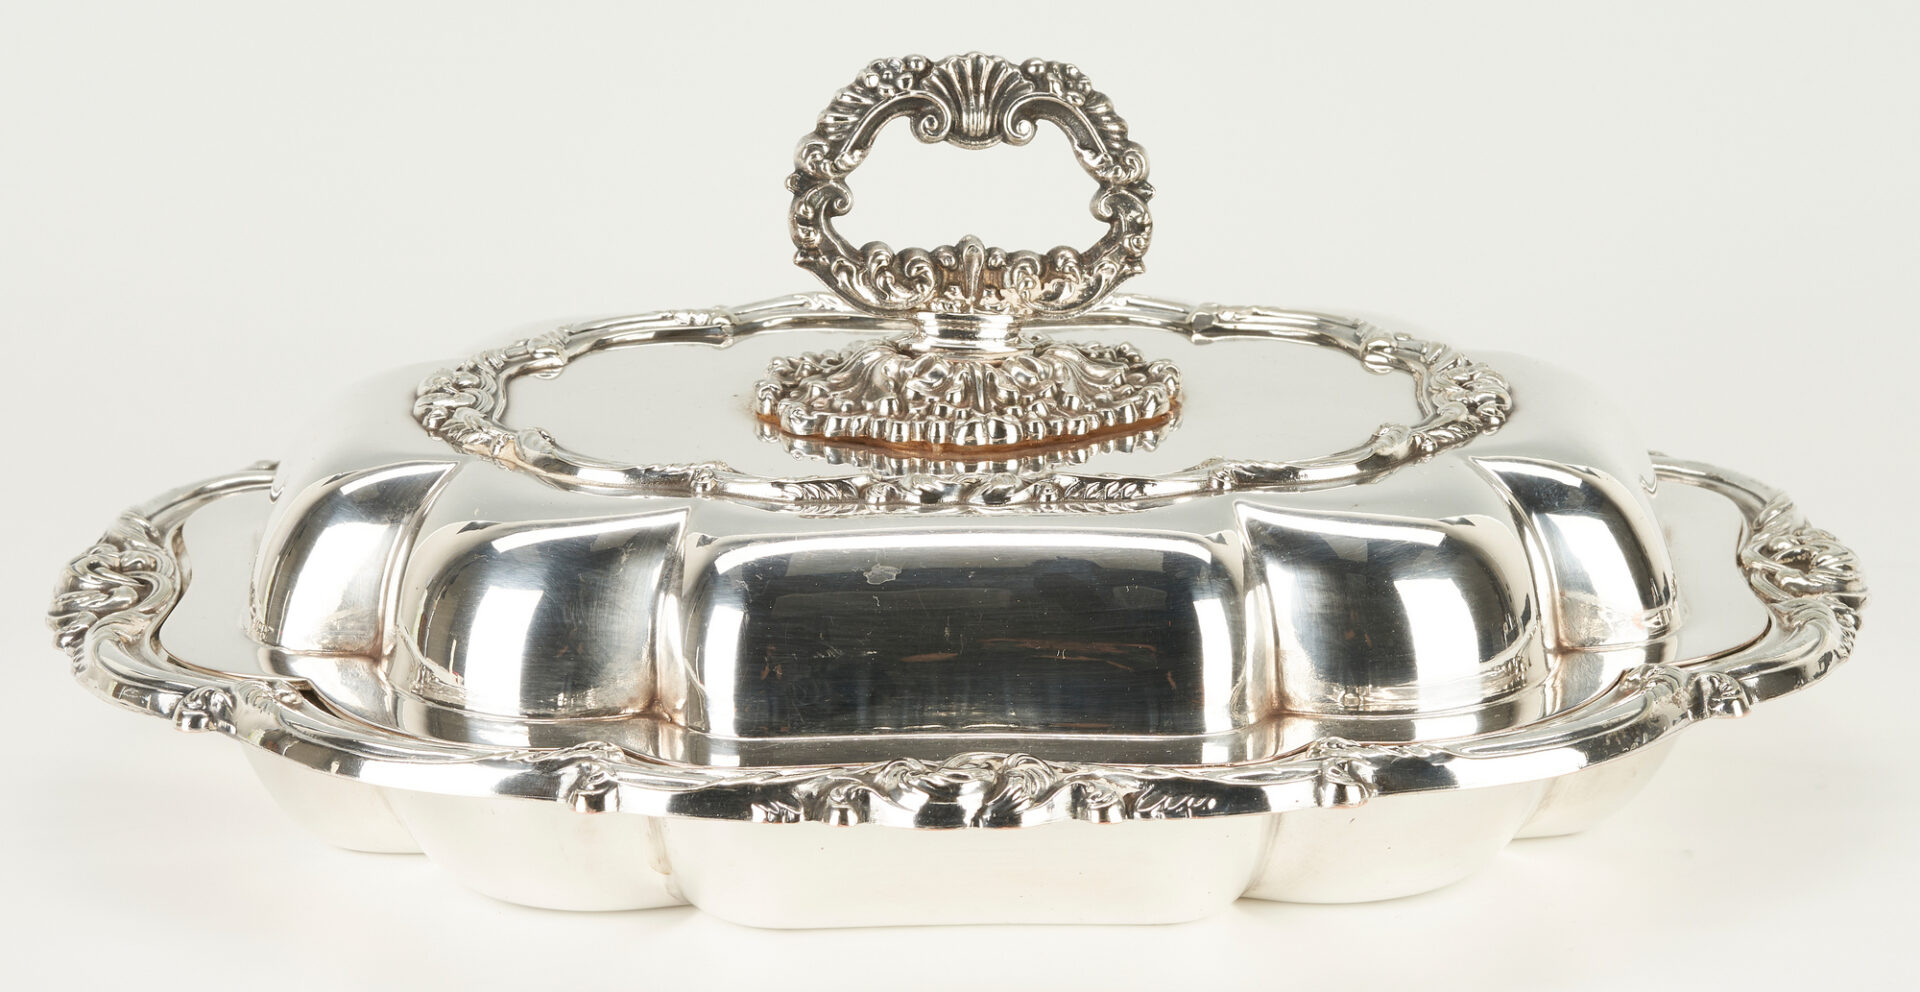 Lot 1209: 5 Pieces of English & American Silver Plated Hollowware